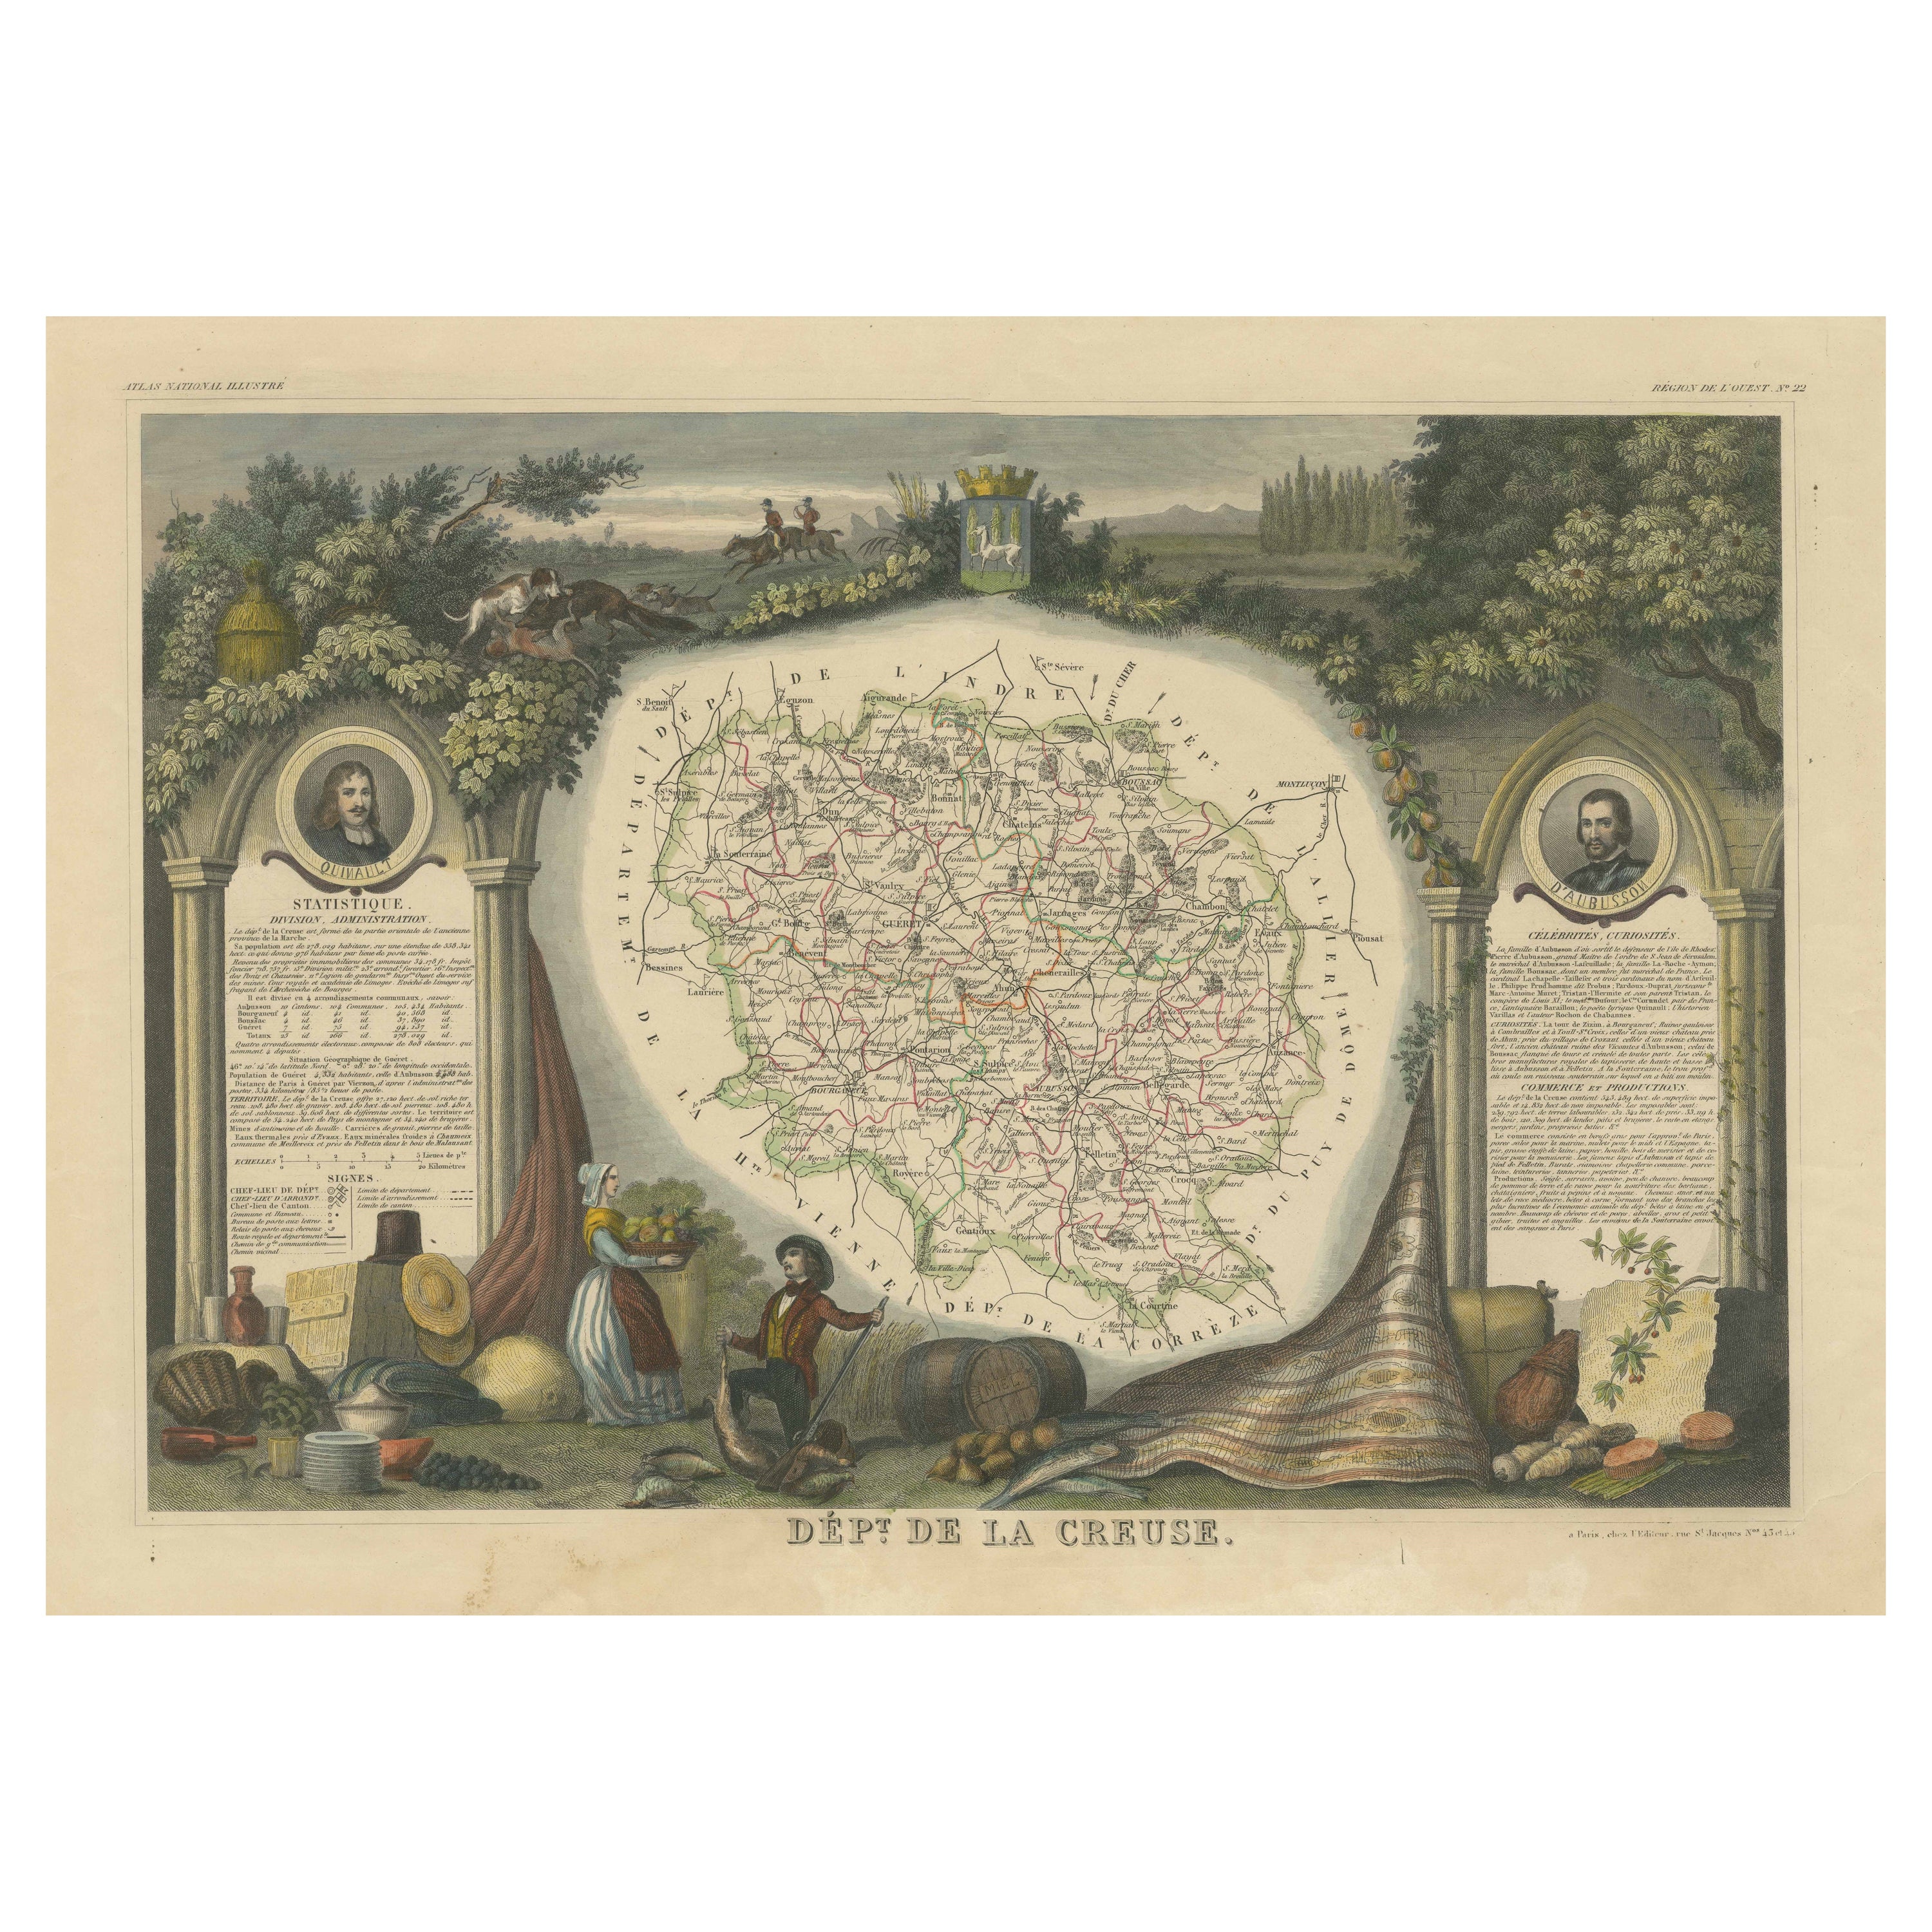 Old Map of the French department of Creuse, France For Sale